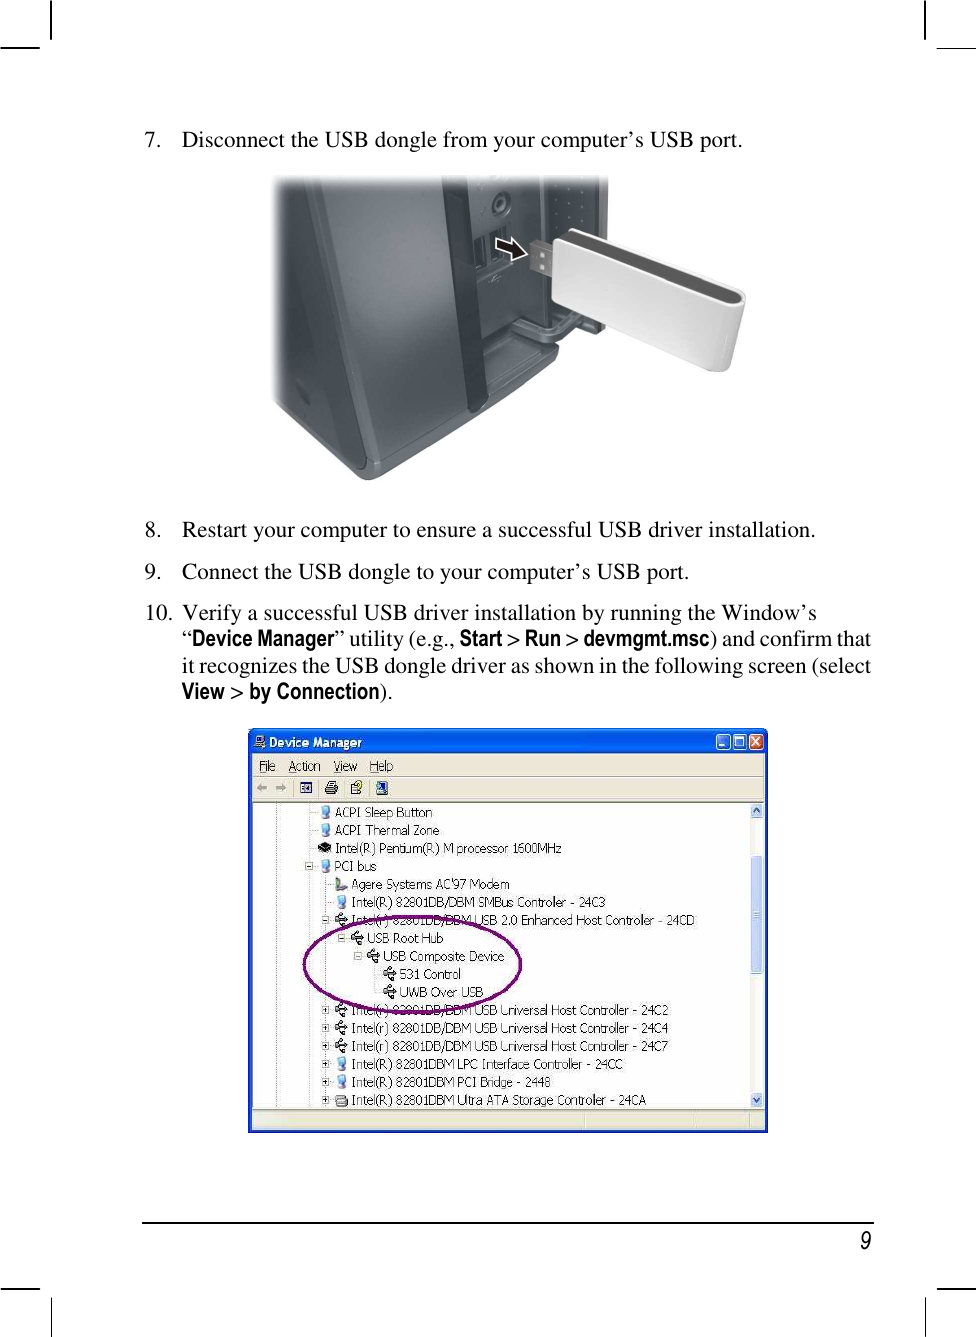    9 7. Disconnect the USB dongle from your computer’s USB port.  8. Restart your computer to ensure a successful USB driver installation. 9. Connect the USB dongle to your computer’s USB port. 10. Verify a successful USB driver installation by running the Window’s “Device Manager” utility (e.g., Start &gt; Run &gt; devmgmt.msc) and confirm that it recognizes the USB dongle driver as shown in the following screen (select View &gt; by Connection).   